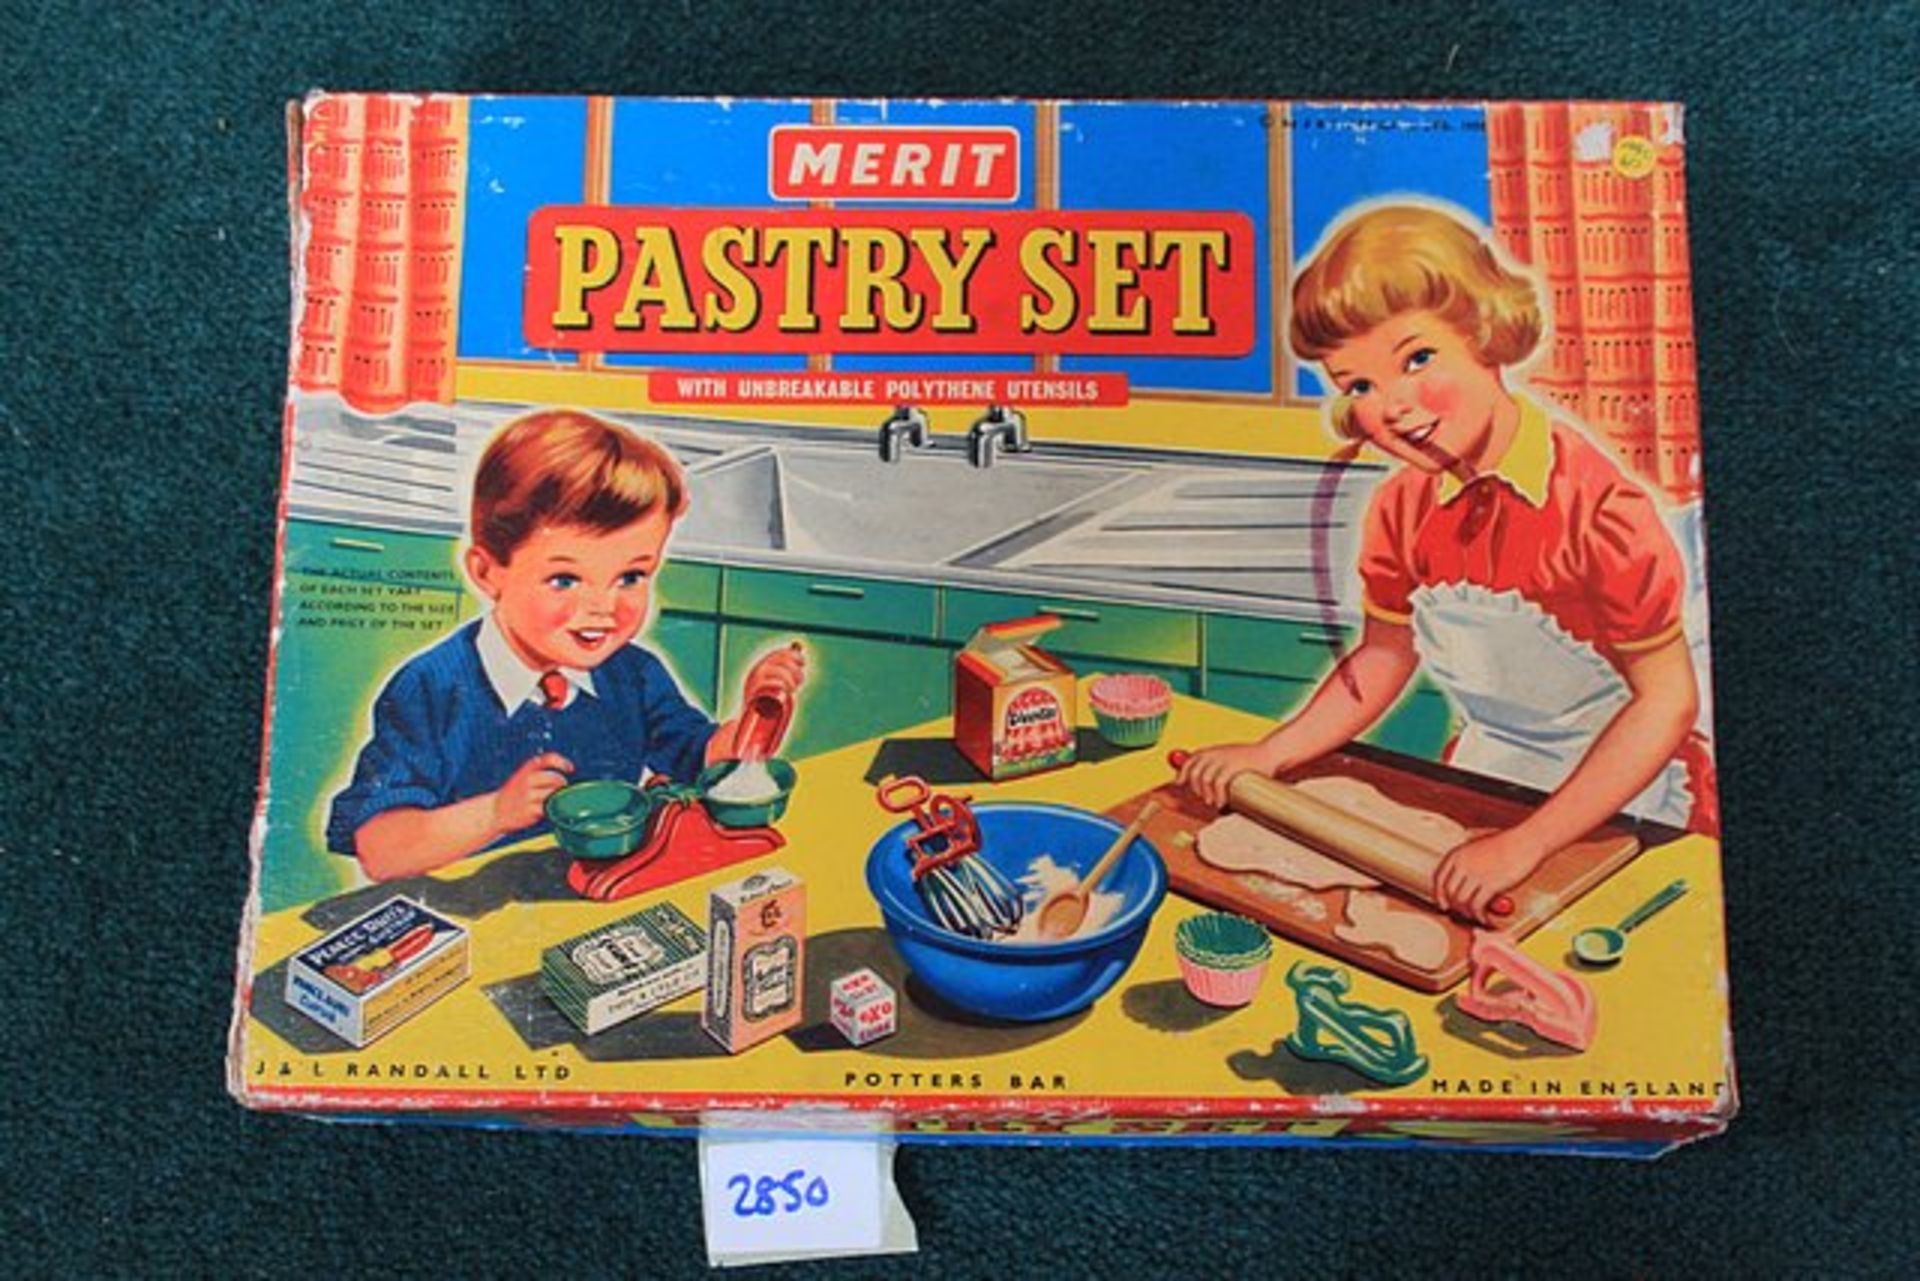 Merit Pastry Set 1950/60s Vintage Toy Pastry Set In It's Original Box. The Set Includes A Wooden